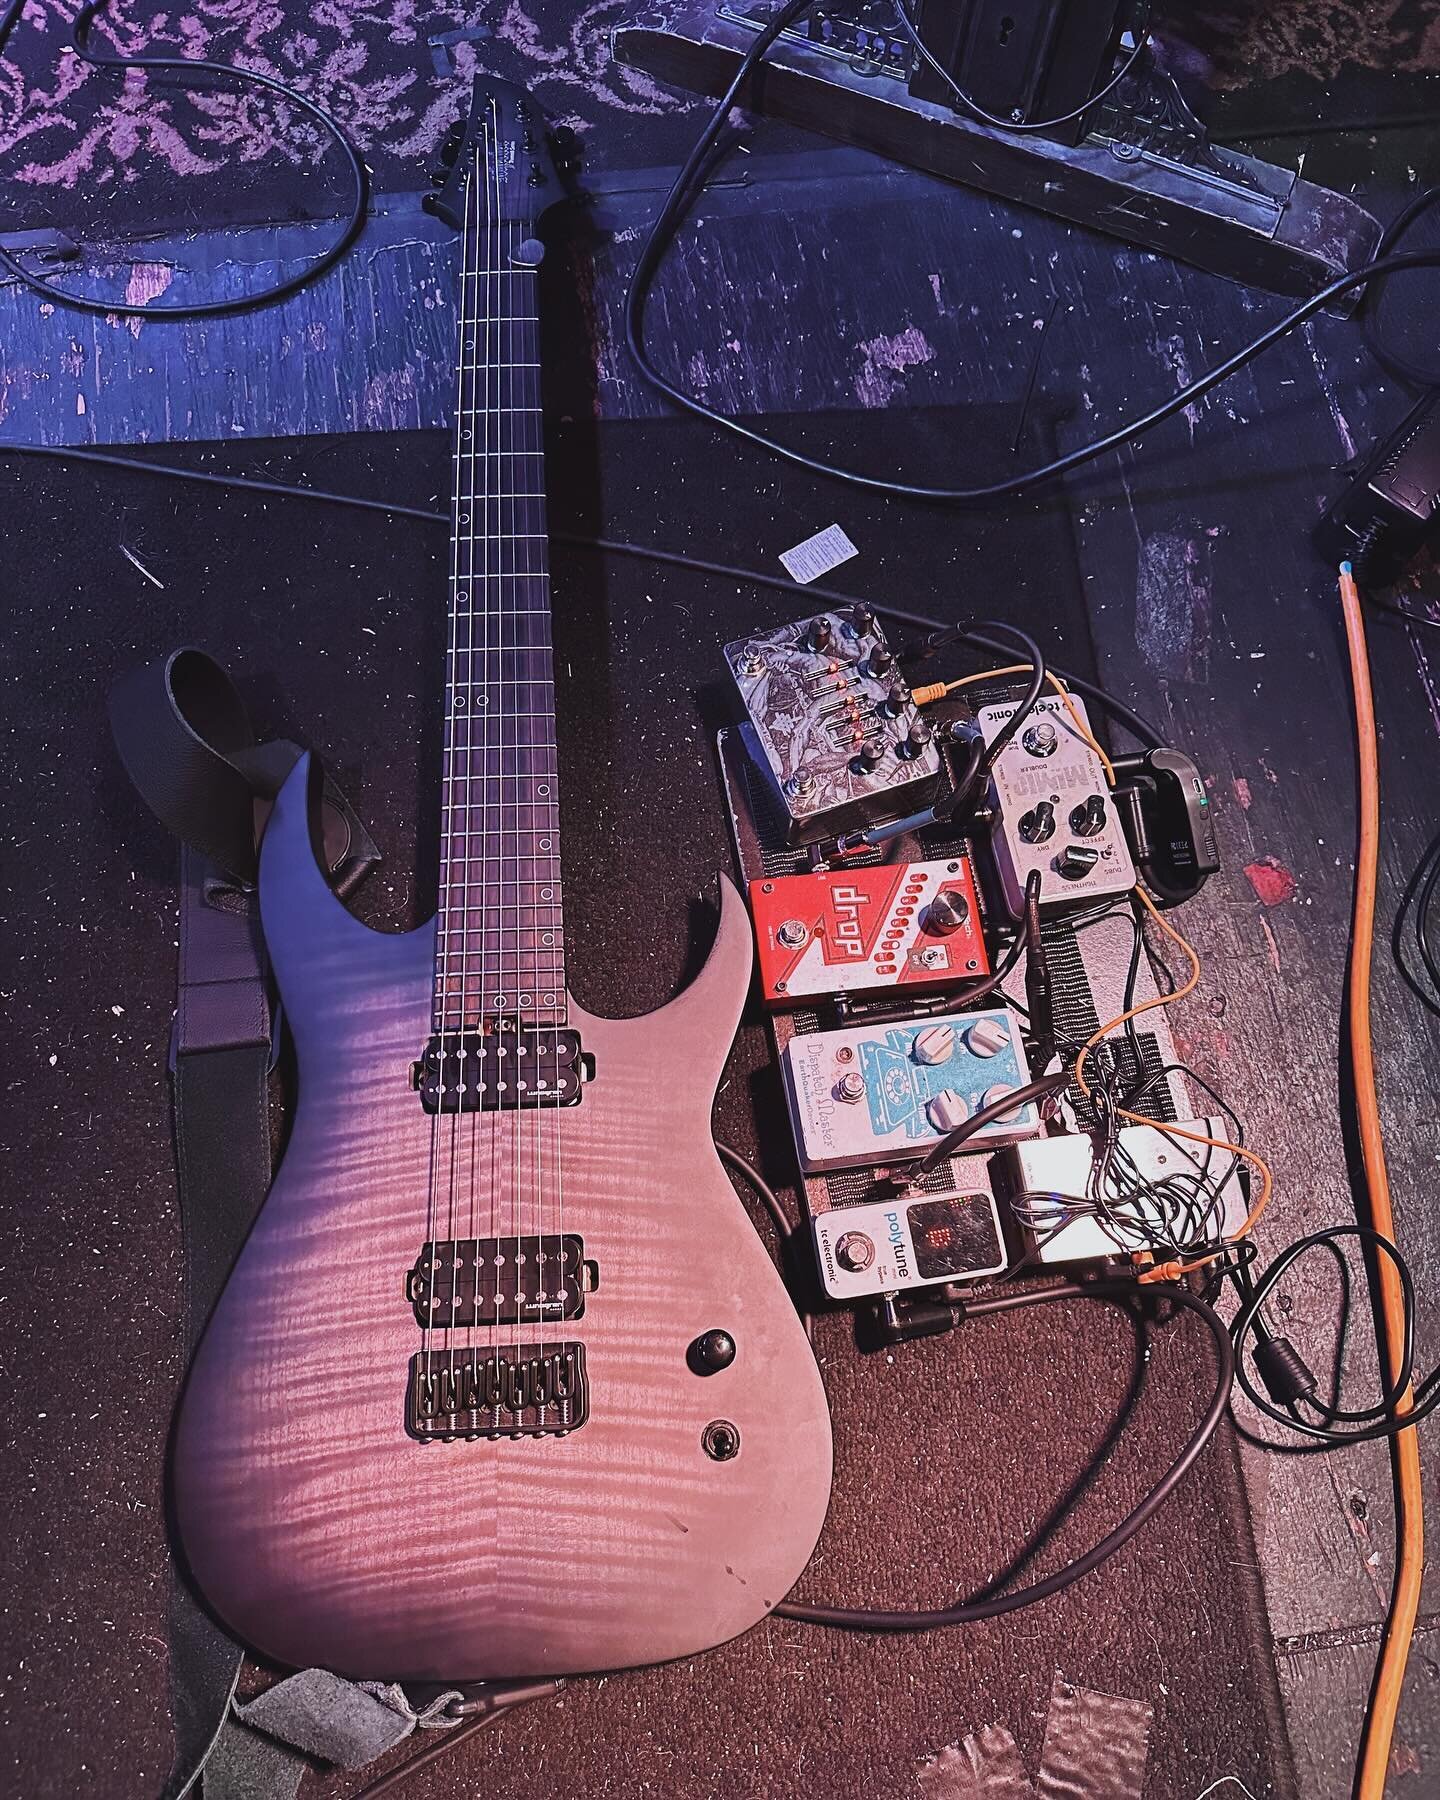 Cam and Ryan of @knollgrind have added the Total Distortion Worship to their live rigs as of the Portland date of their current tour. They're both running them into a Dean Costello HMW. 🙌🏻

You can catch them on their last two dates here:
03/04 Okl